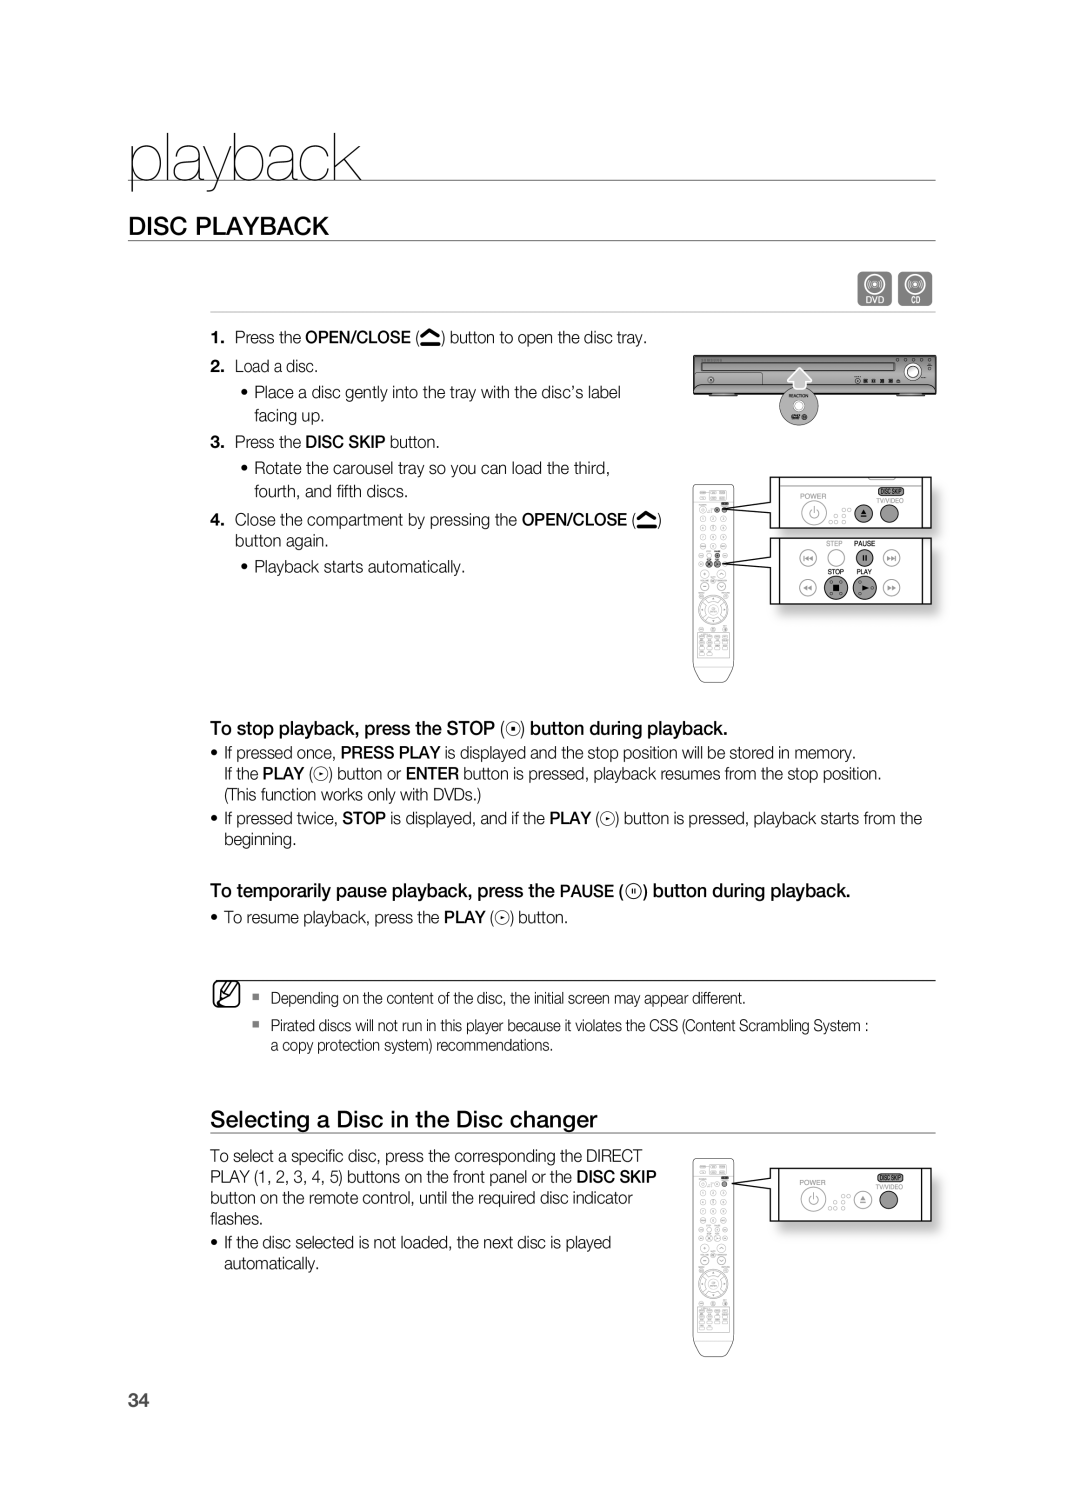 Samsung HT-TWZ415 user manual playback, Disc Playback 